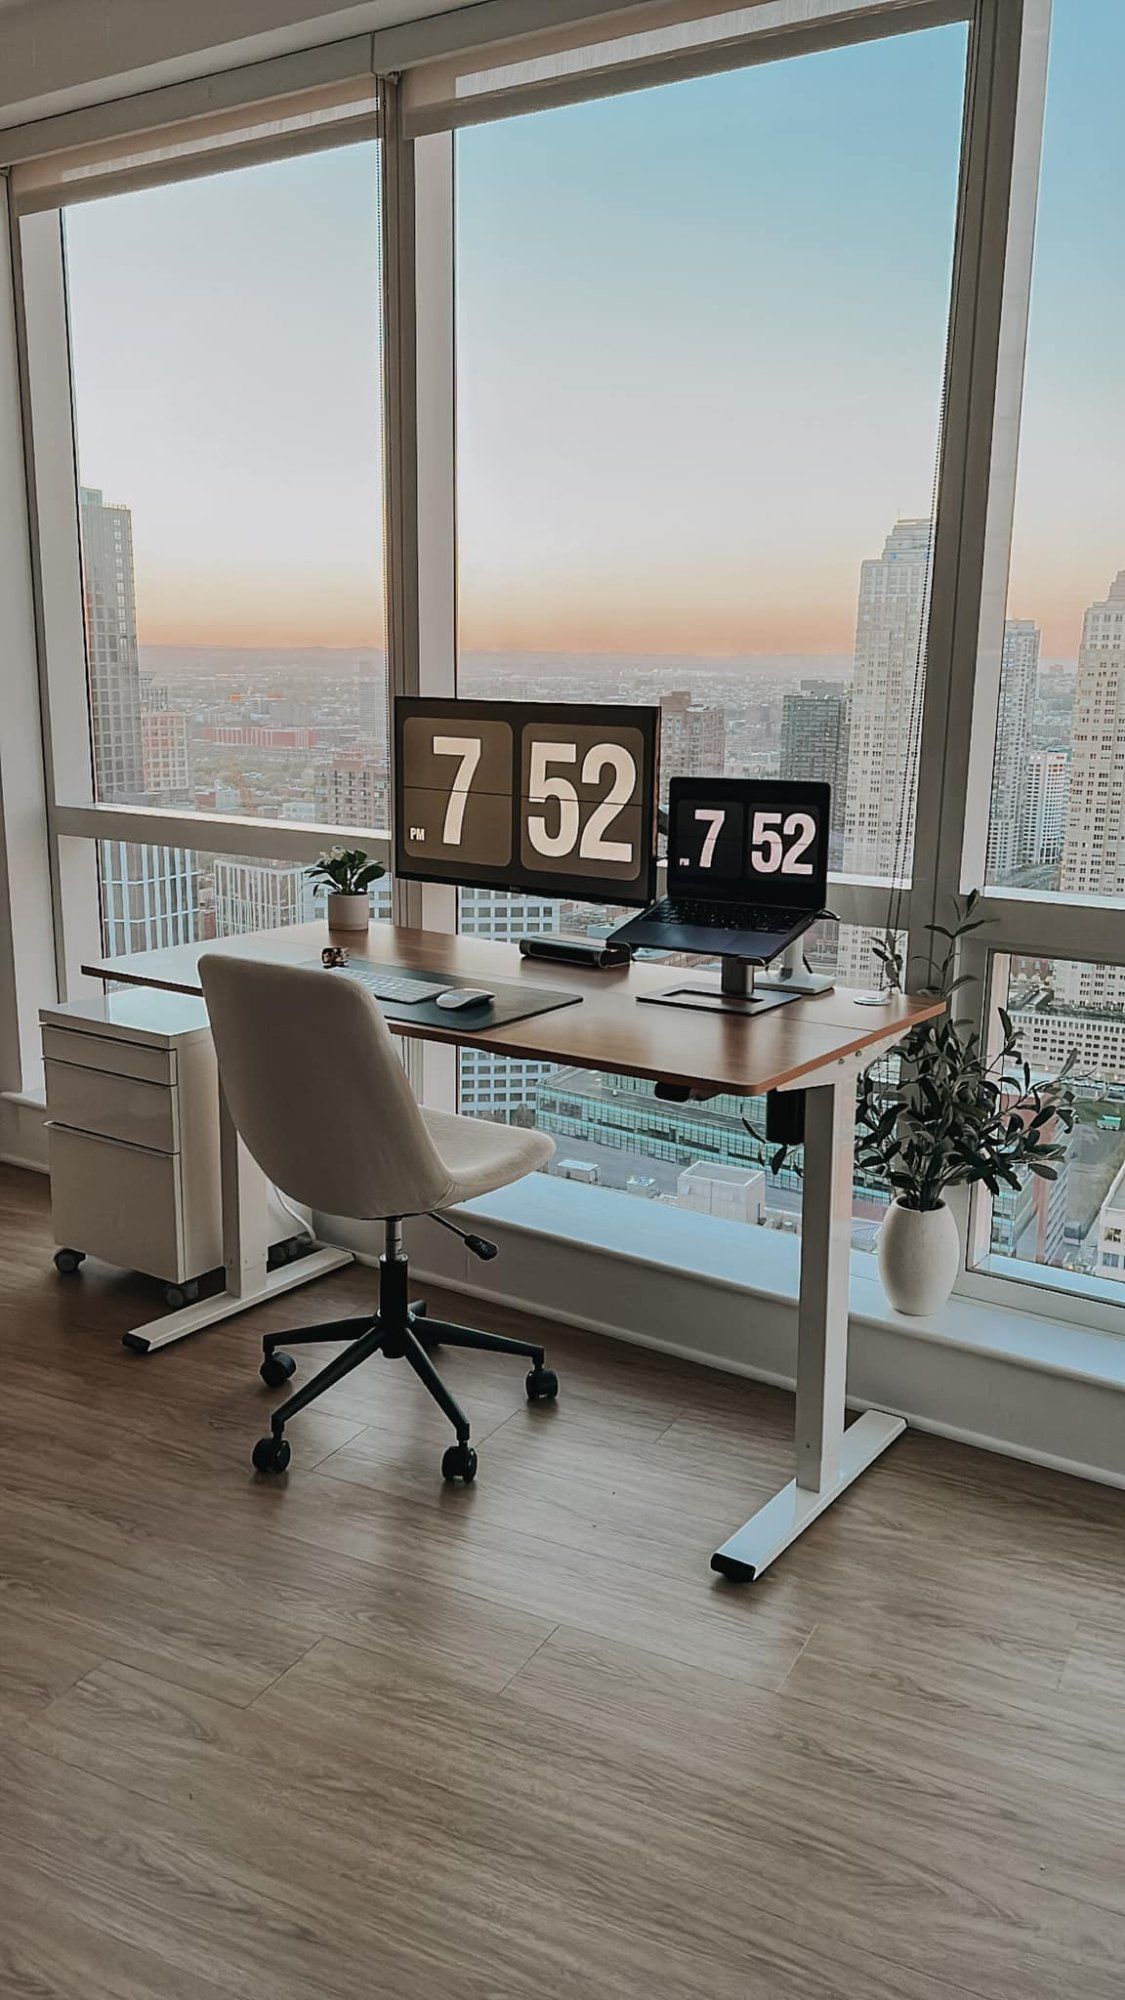 7 Work From Home Office Essentials for 2021